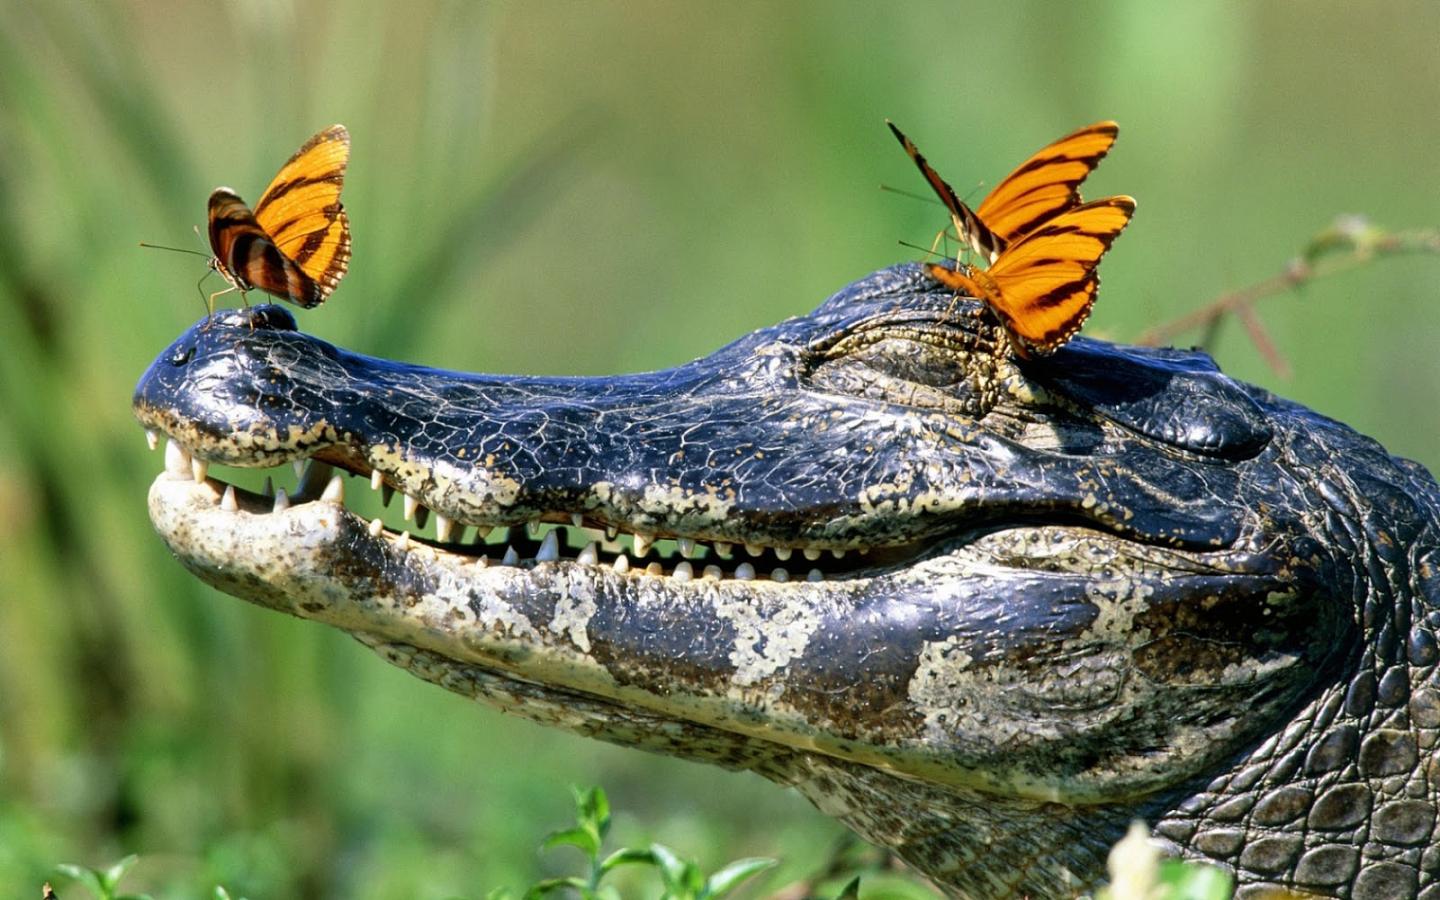 Alligator wallpapers HD  Download Free backgrounds